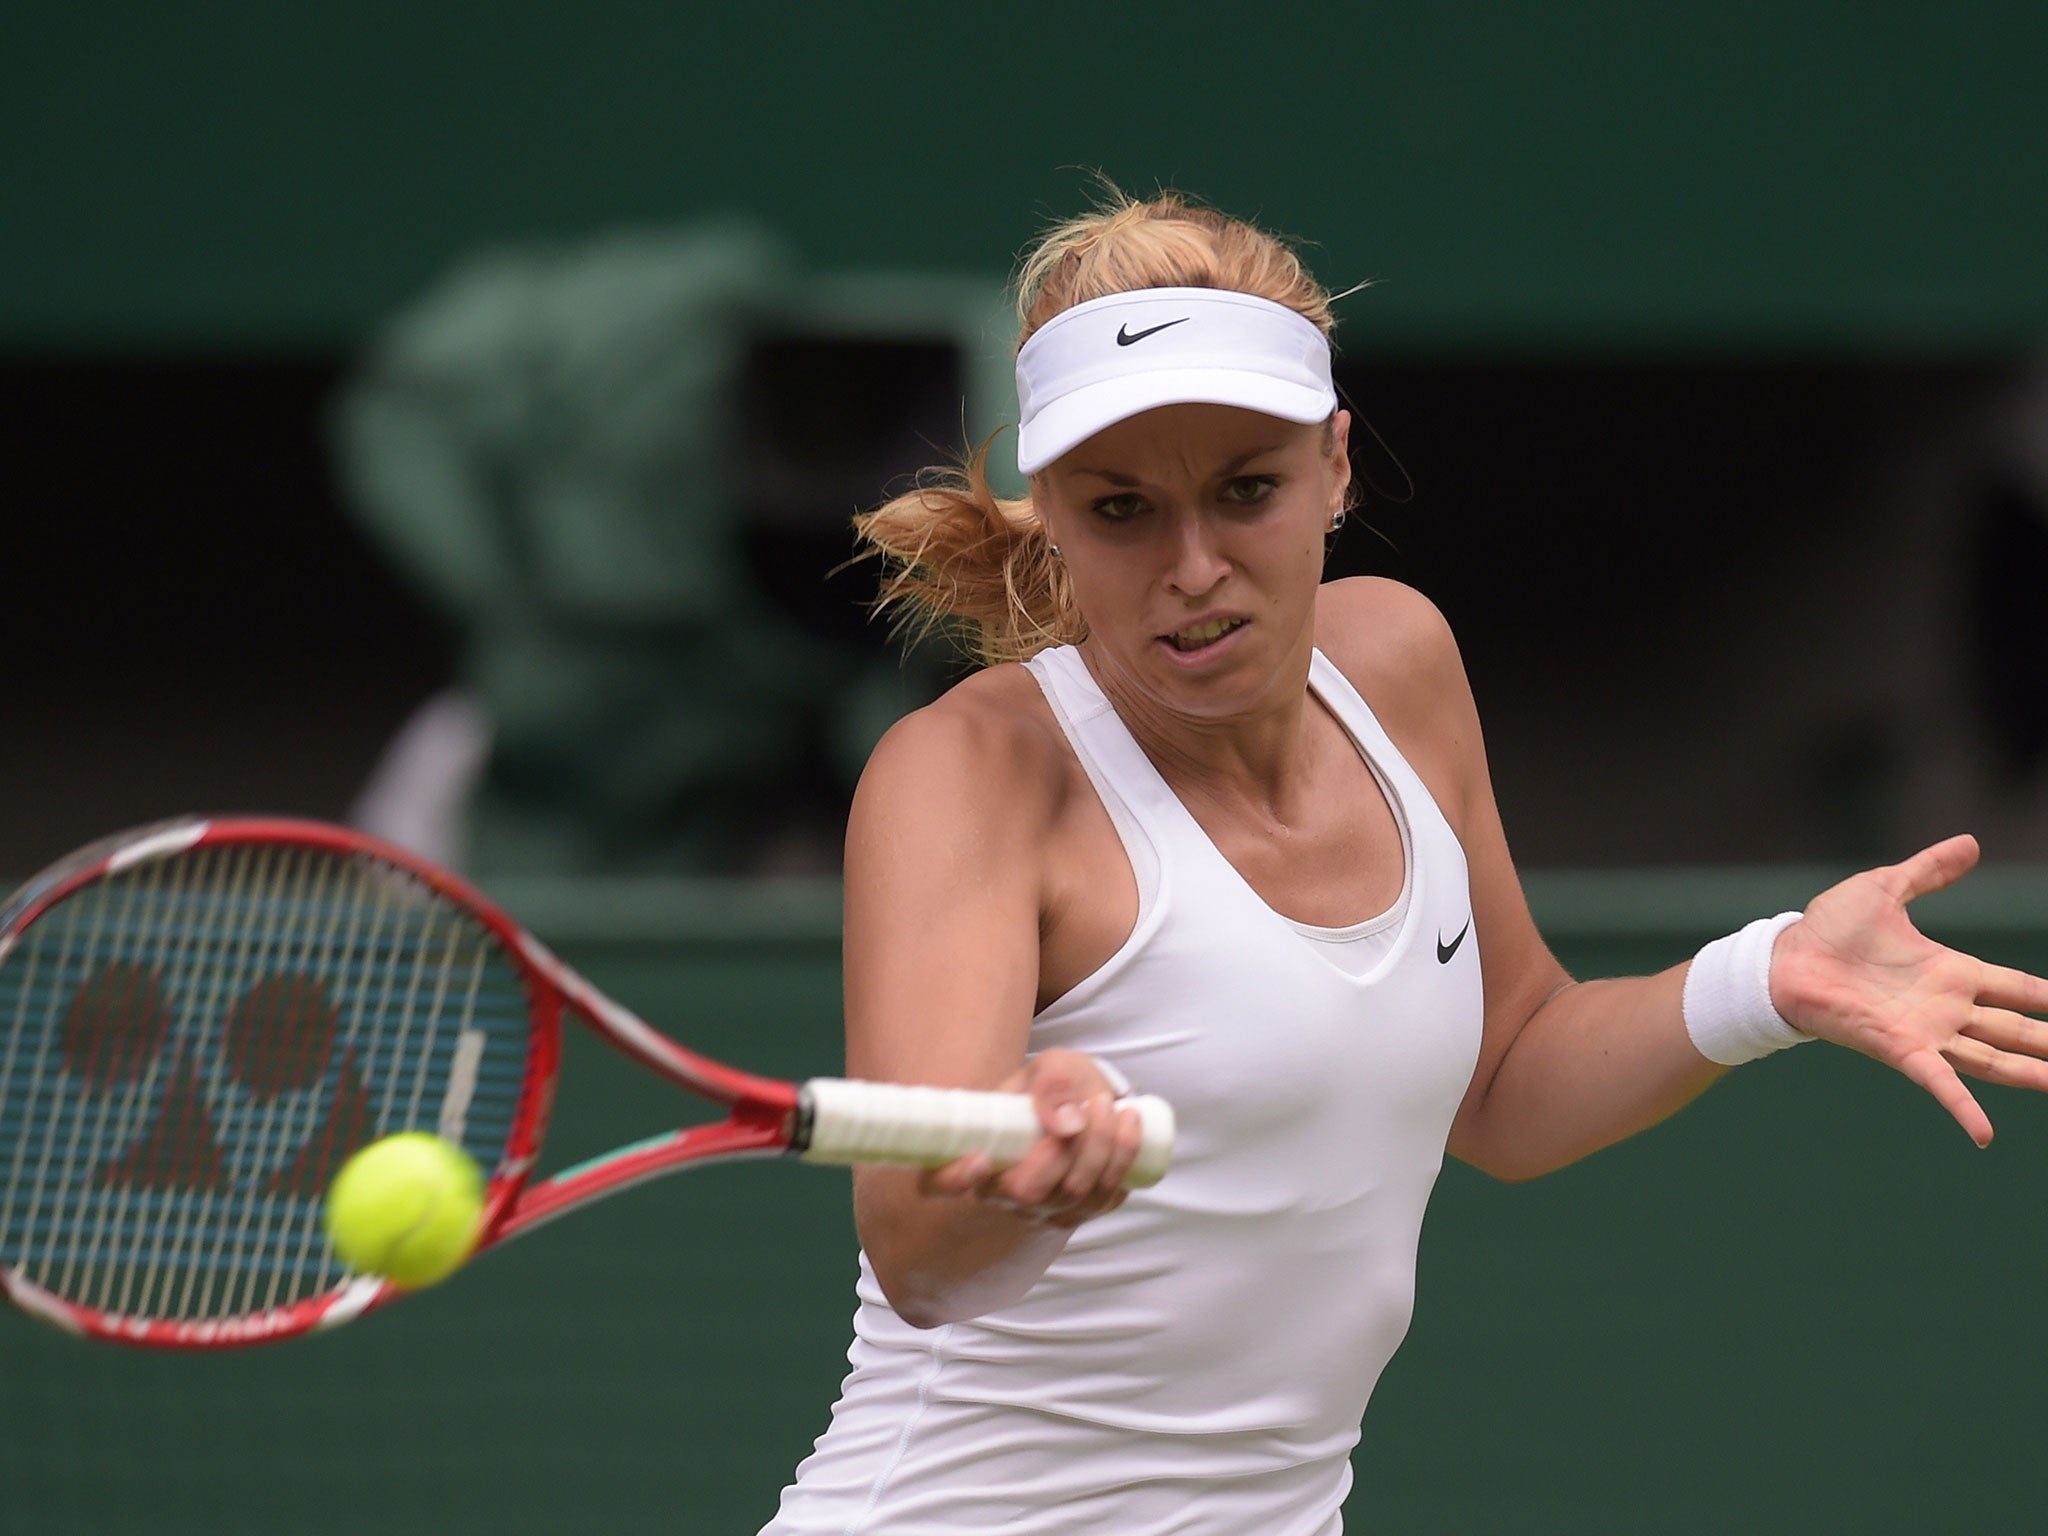 Germany's Sabine Lisicki returns against Israel's Julia Glushko during their women's singles first round match on day two of the 2014 Wimbledon